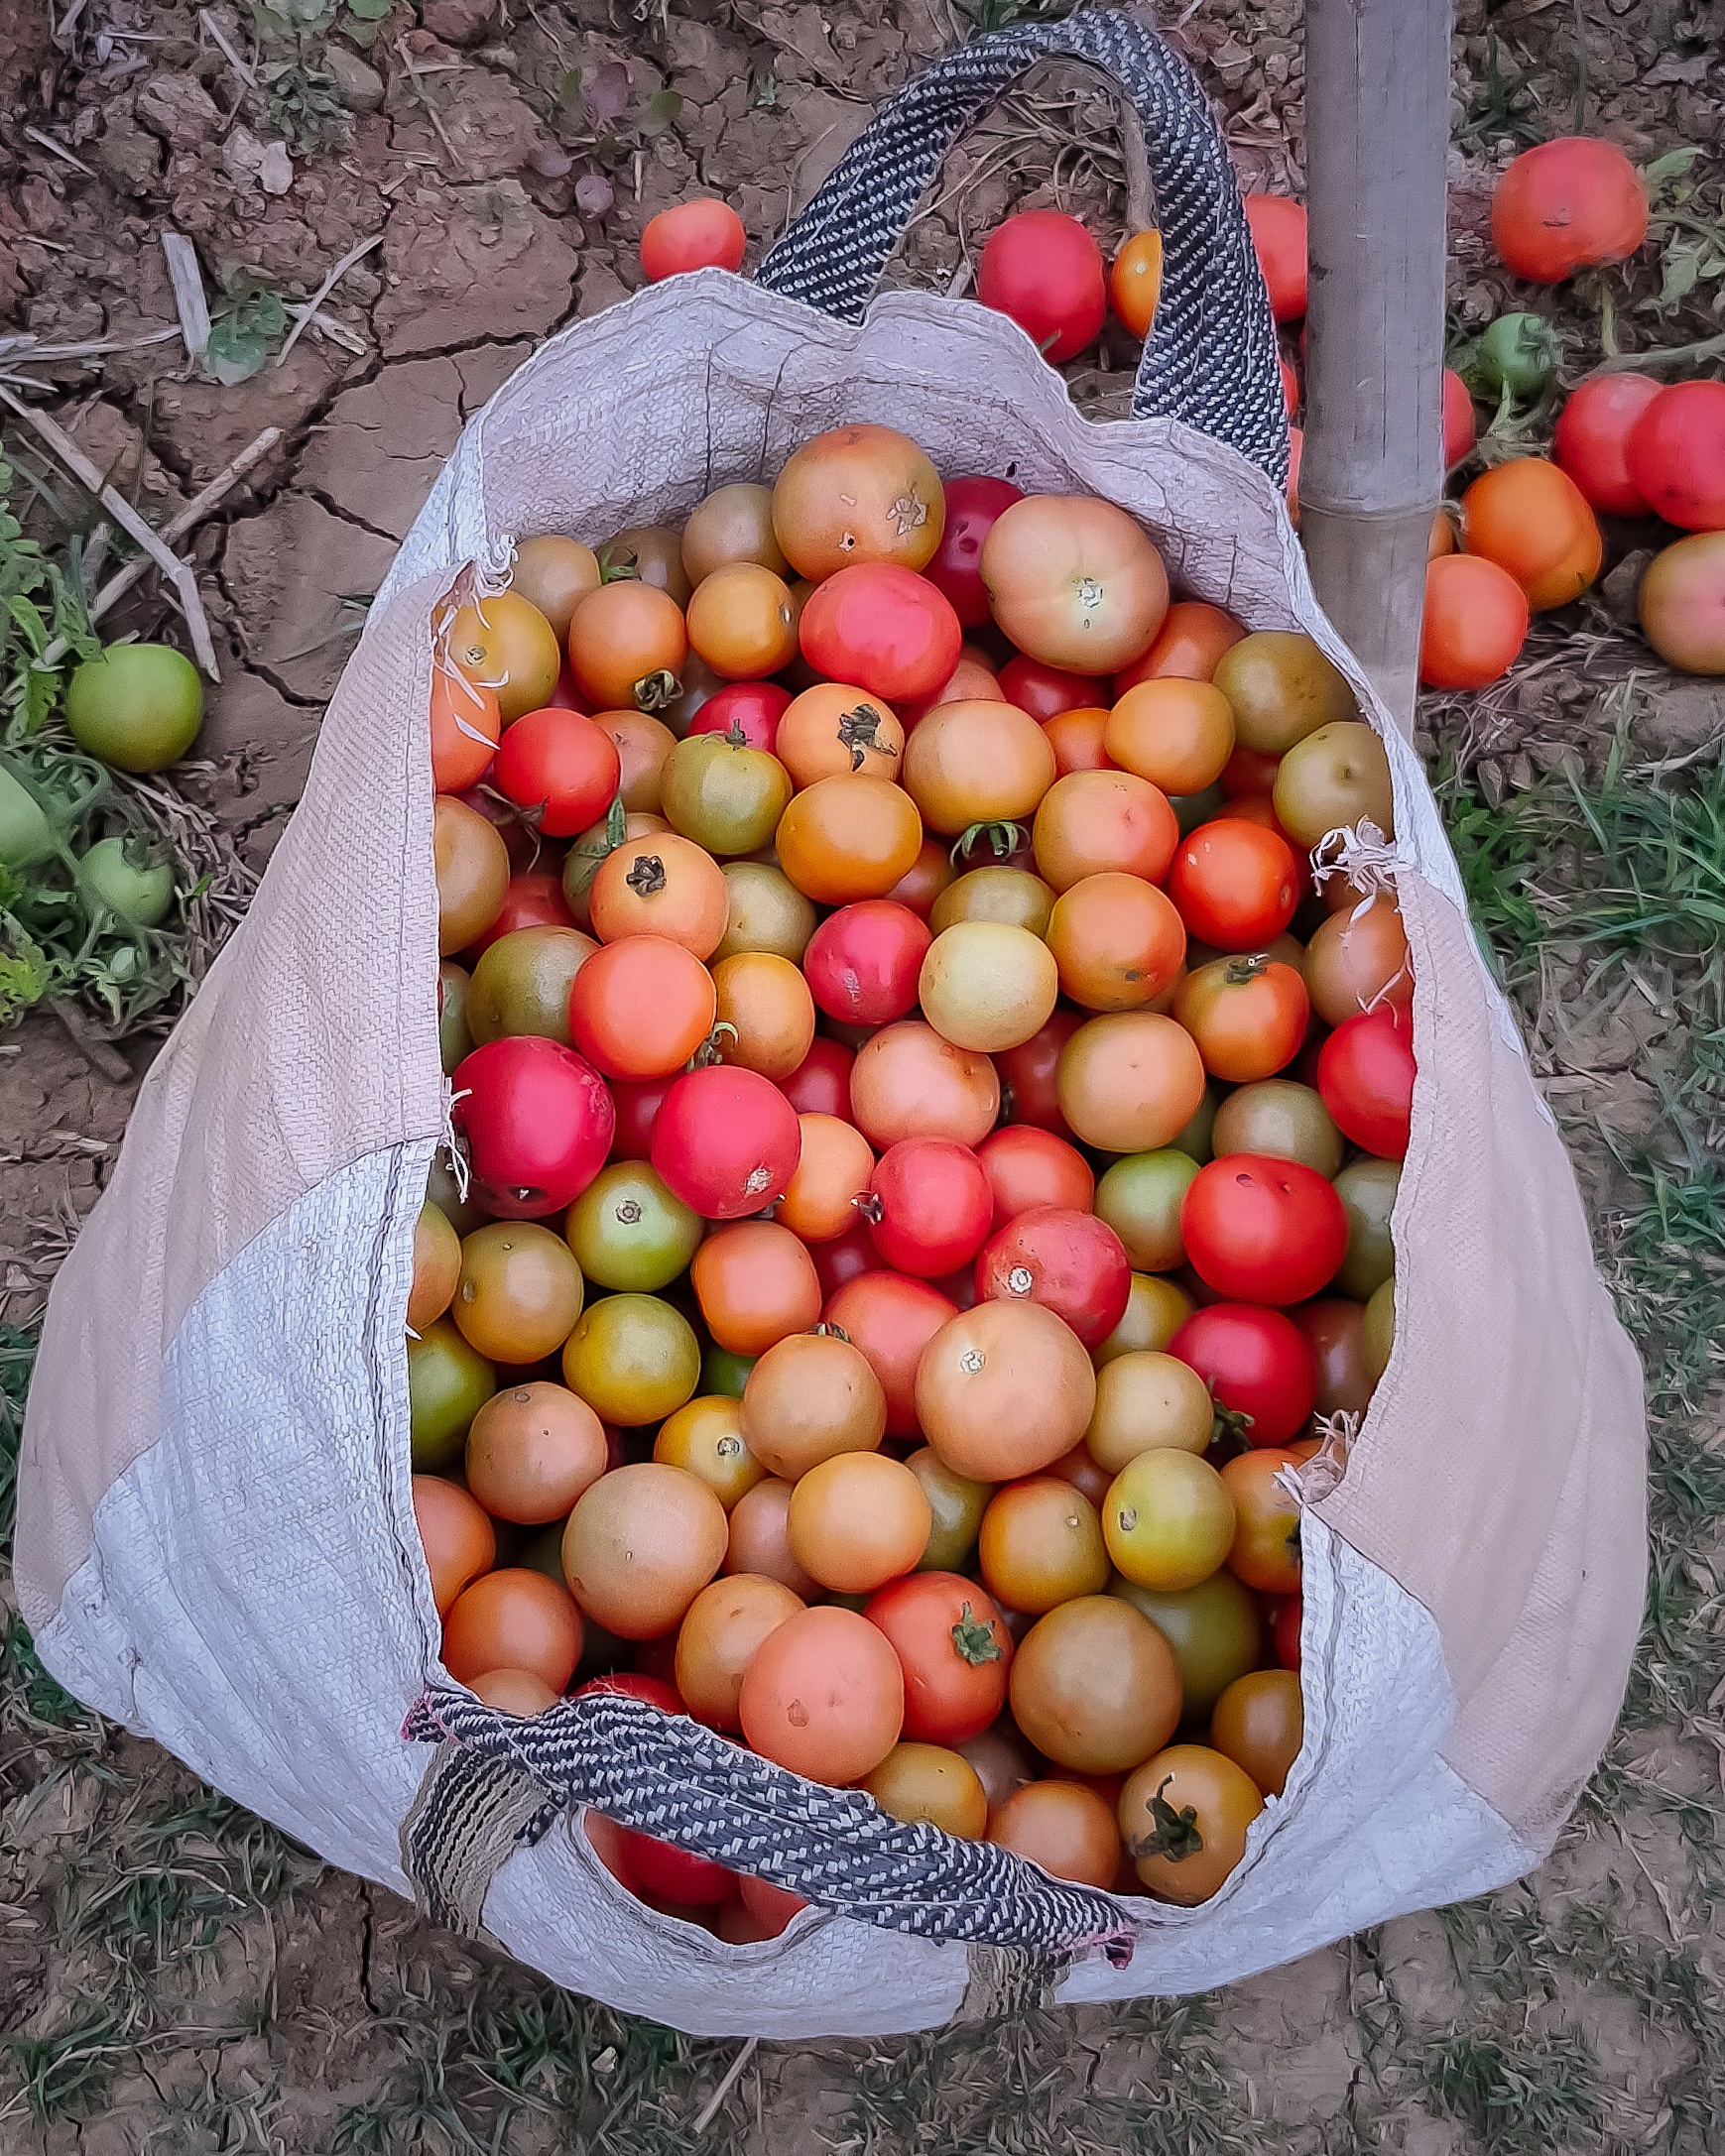 tomatoes in a bag